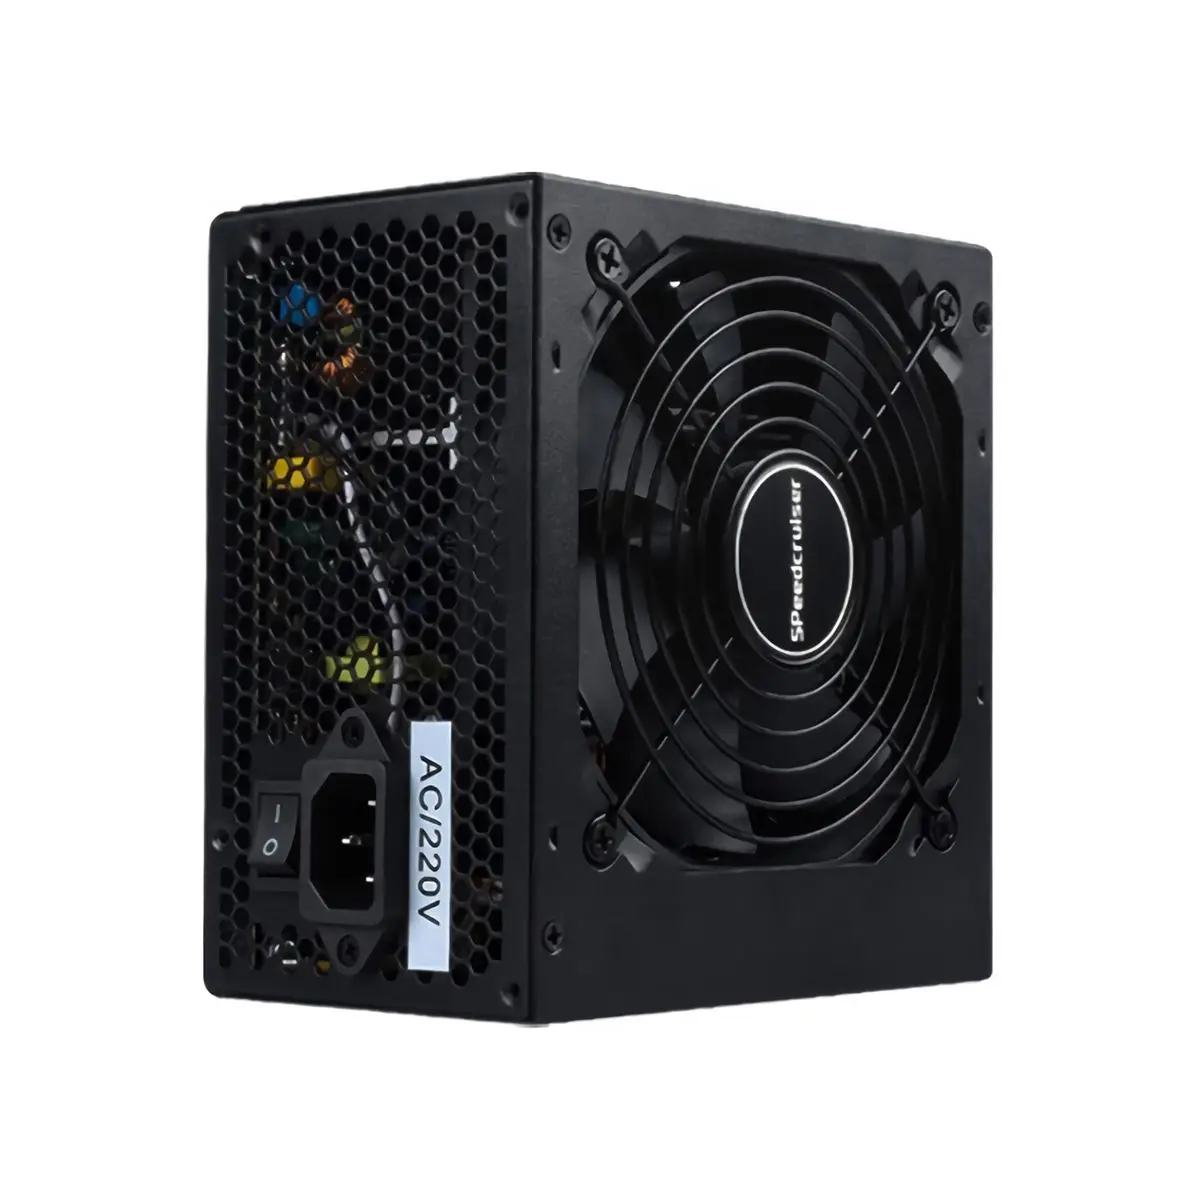 GT-750WS 550W PC Power Supply 80 PLUS Gold ATX 12V 2.31 Computer Case Chassis Active PFC Power Supply For Desktop Computer